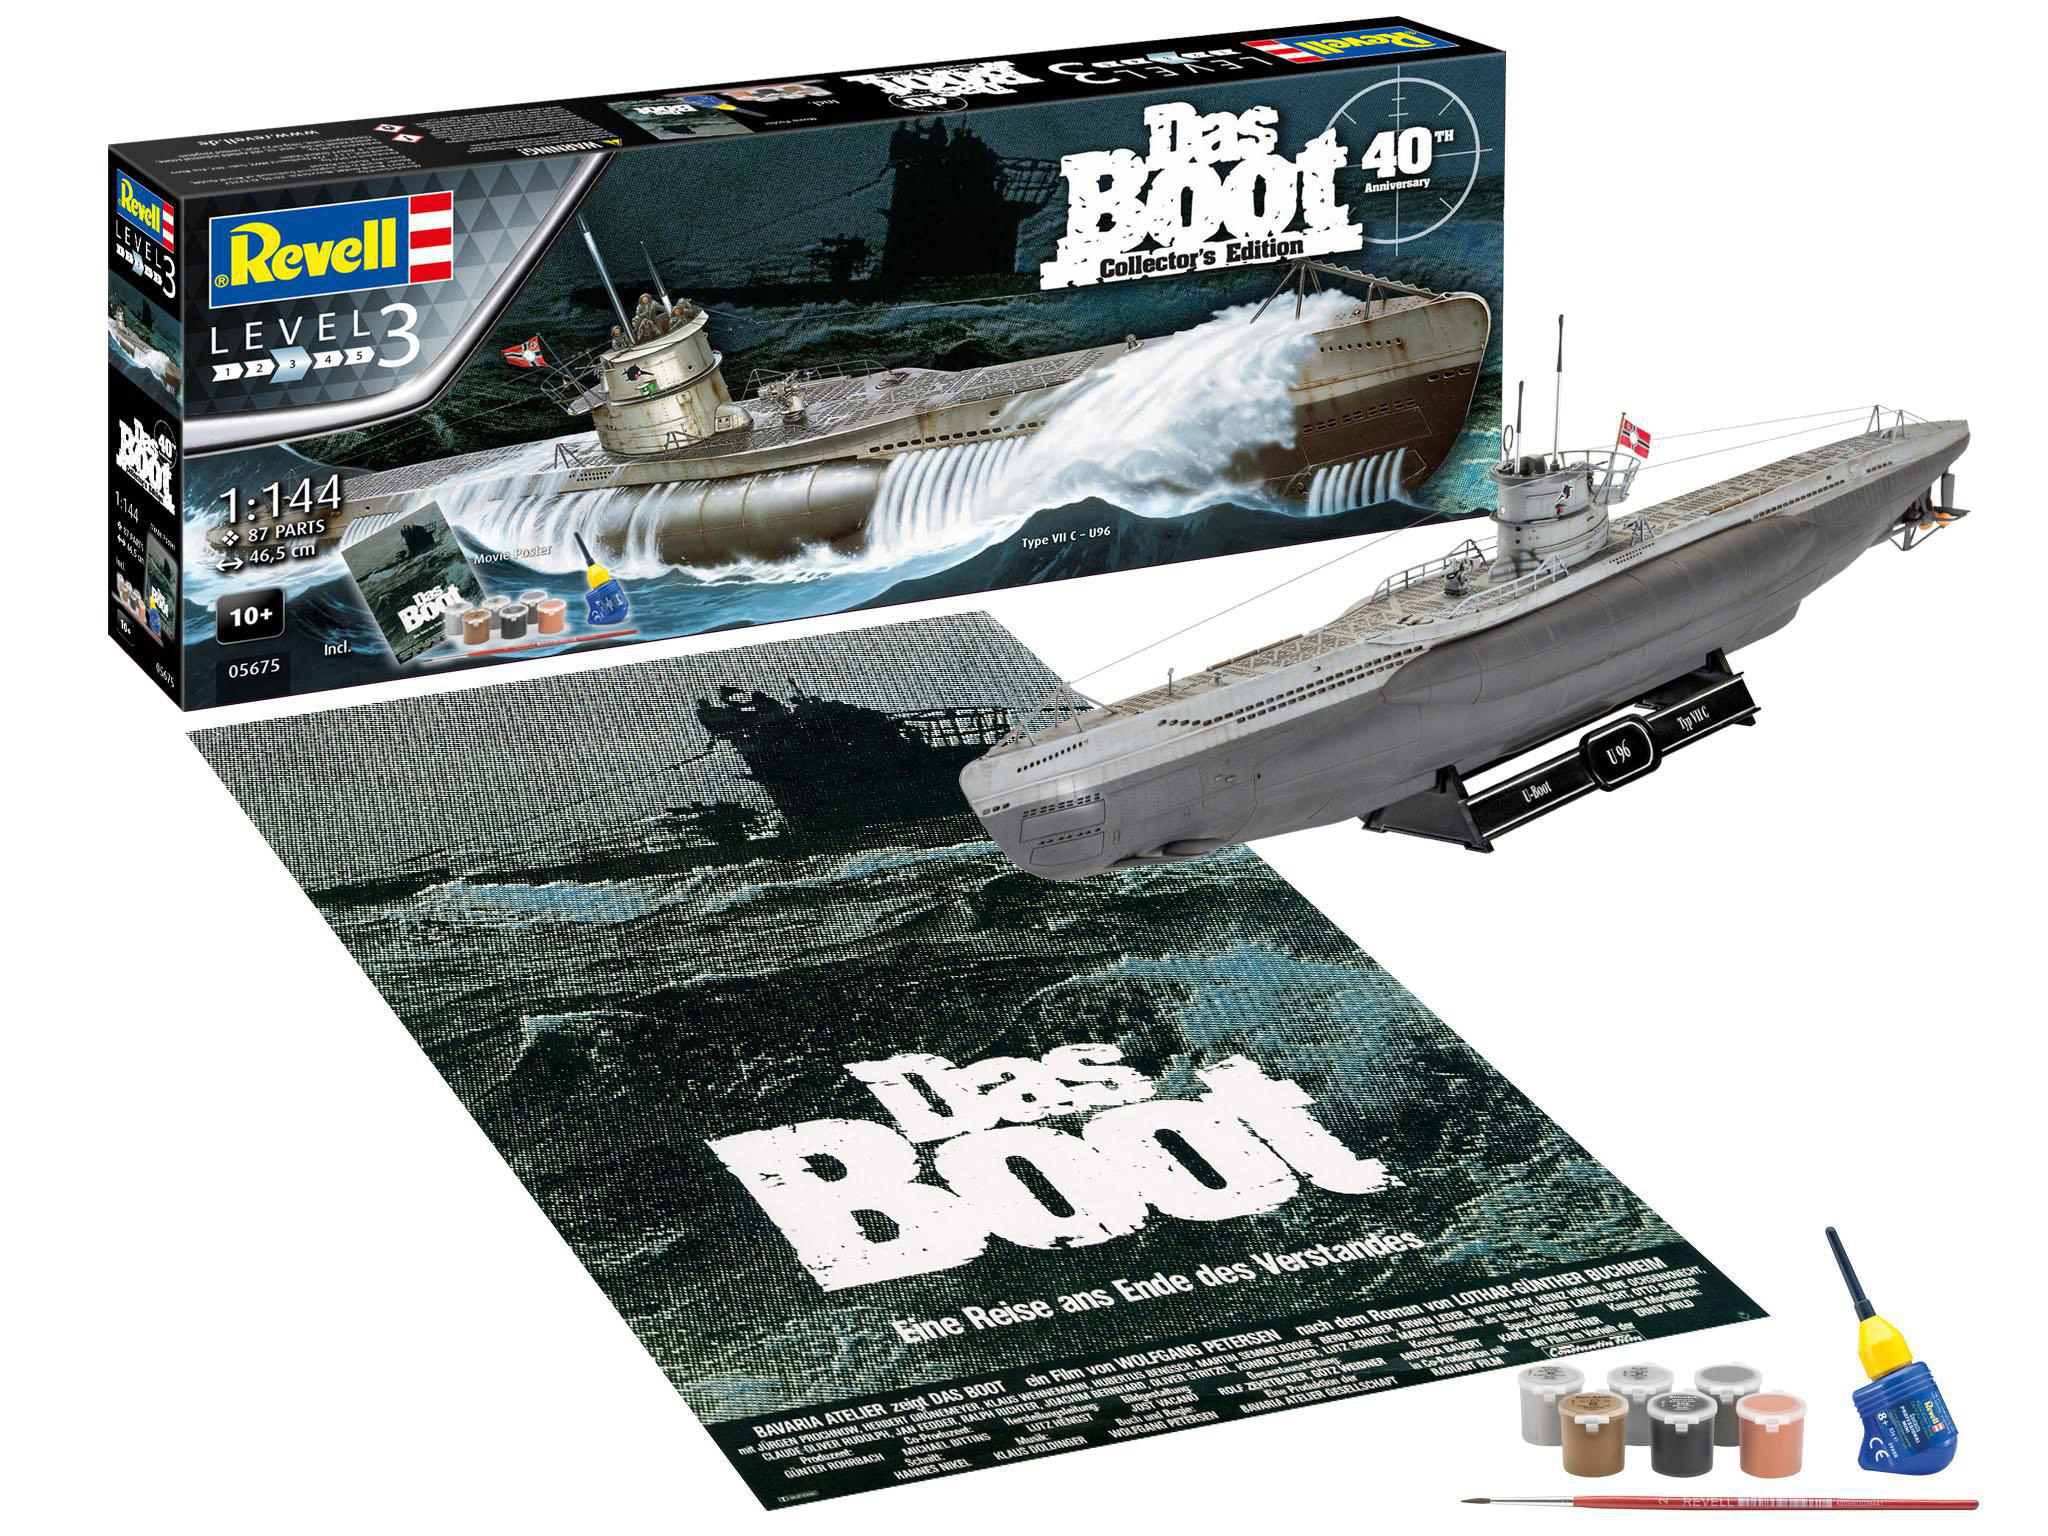 Mehrfarbig Boot Modellbausatz, Edition Collector\'s Das 40th Anniversary REVELL -